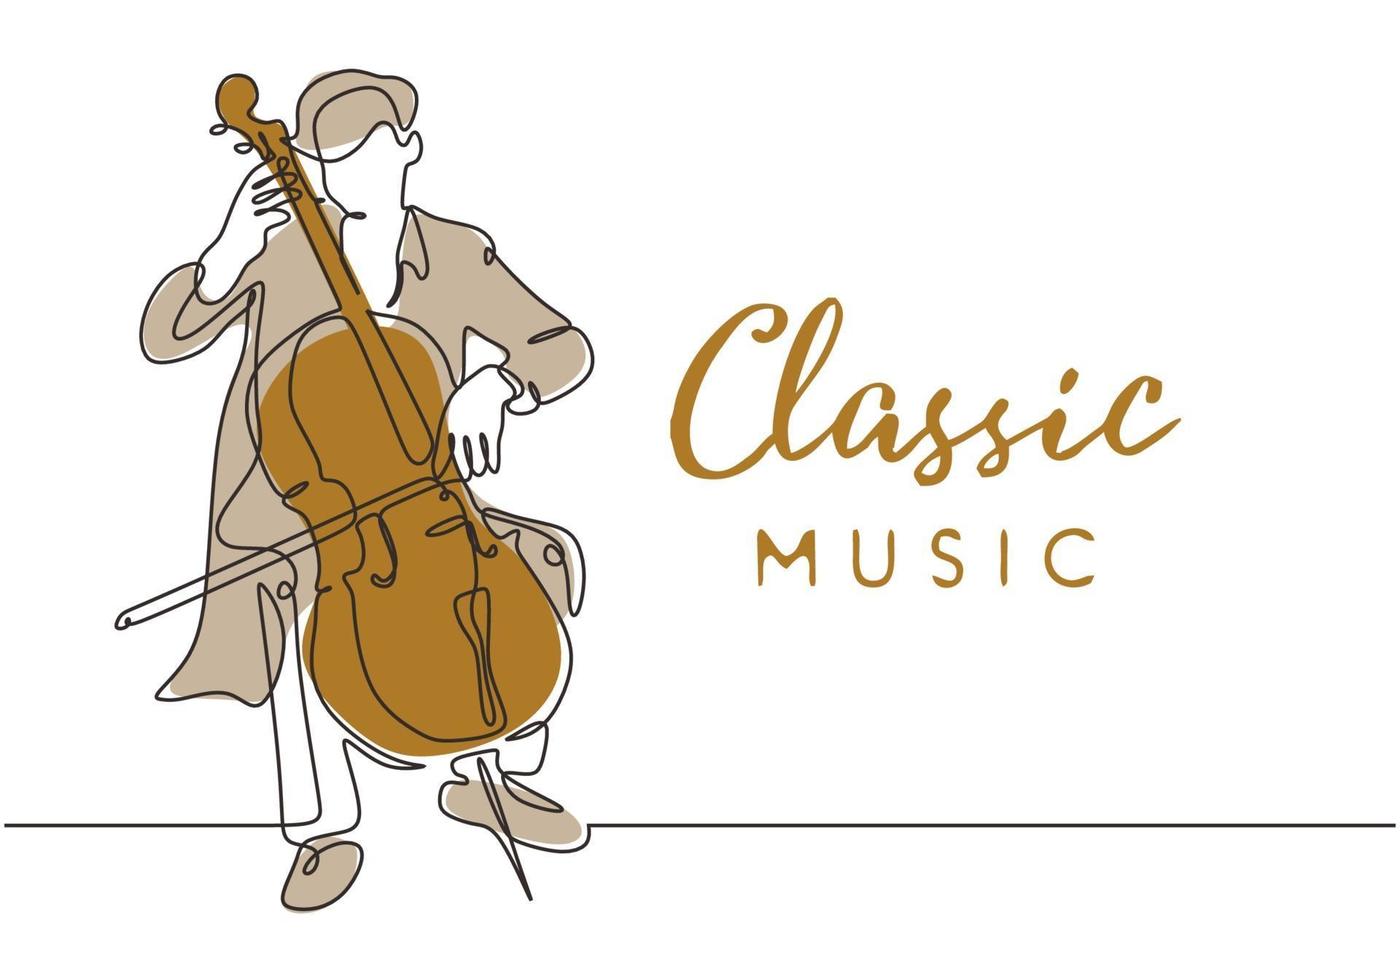 Classic music one line drawing, a man play cello instrument vector